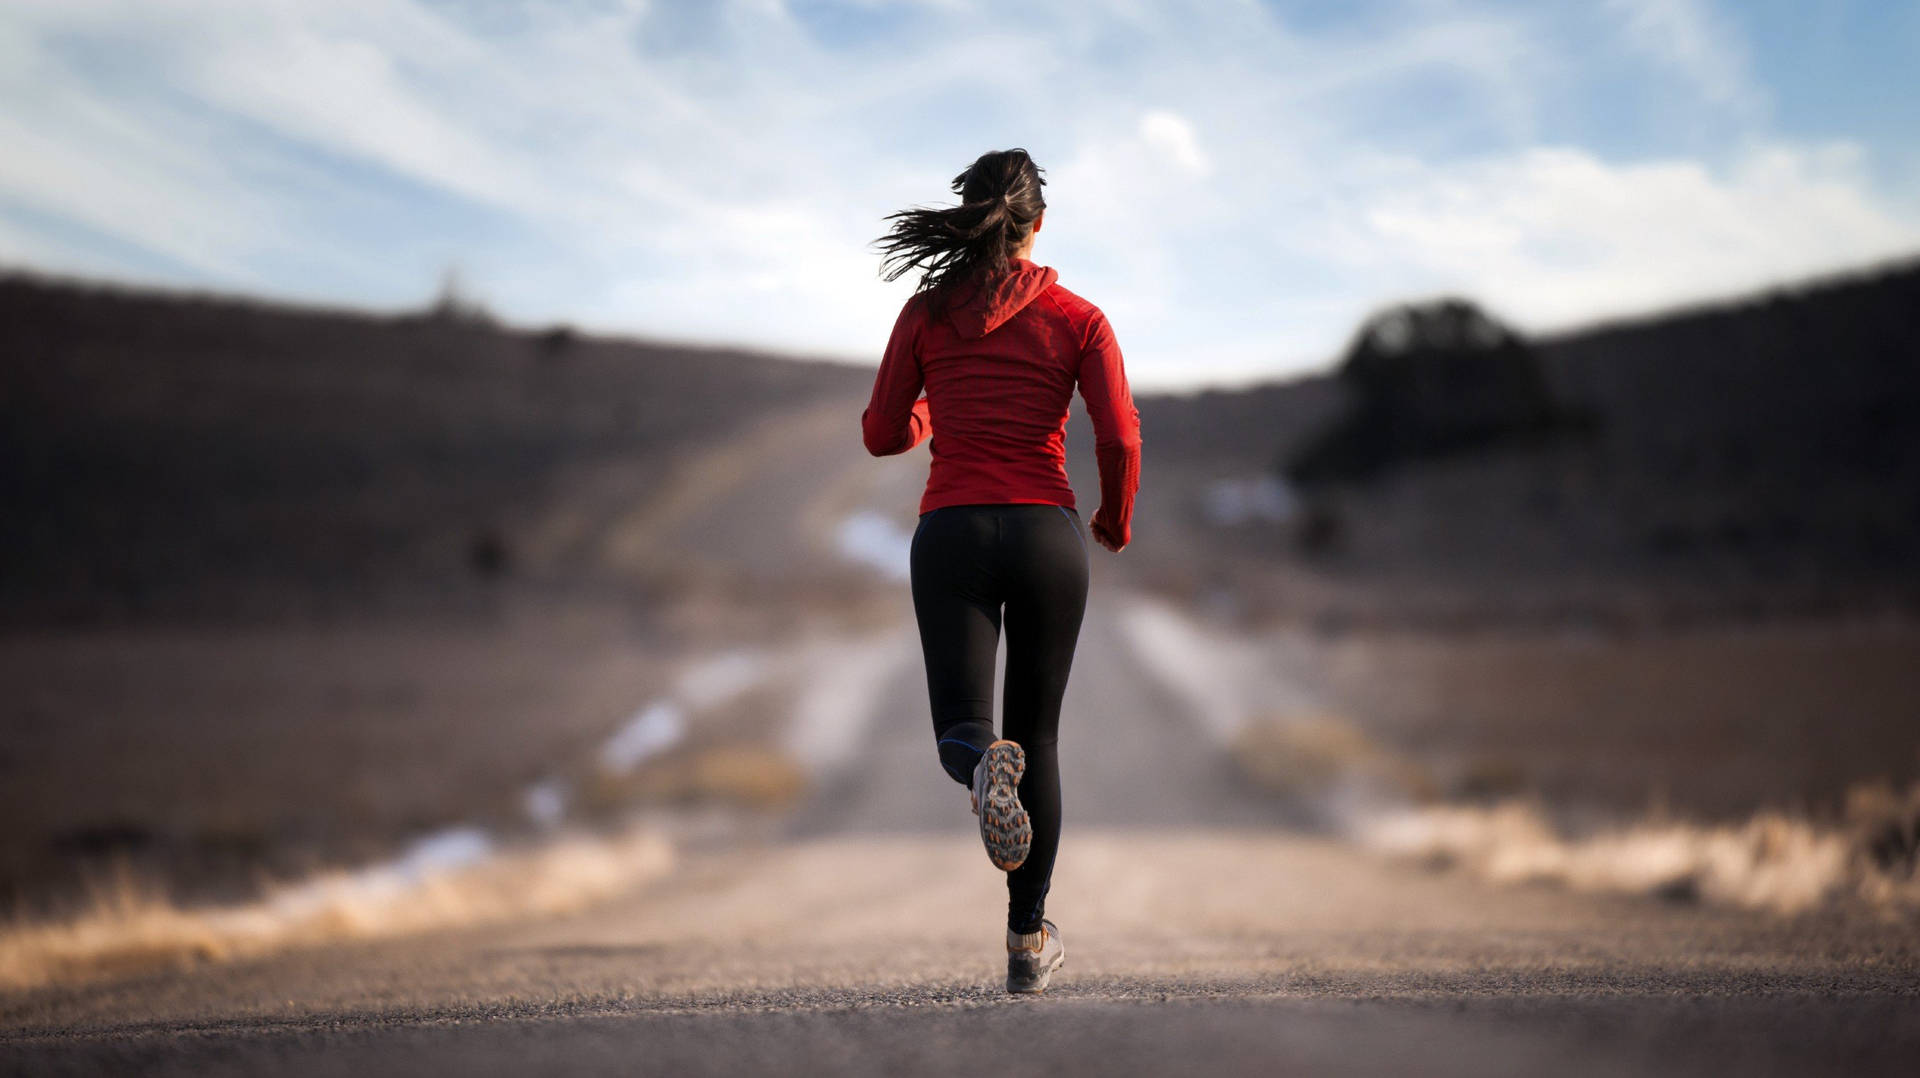 Focus Running Woman In Road Background